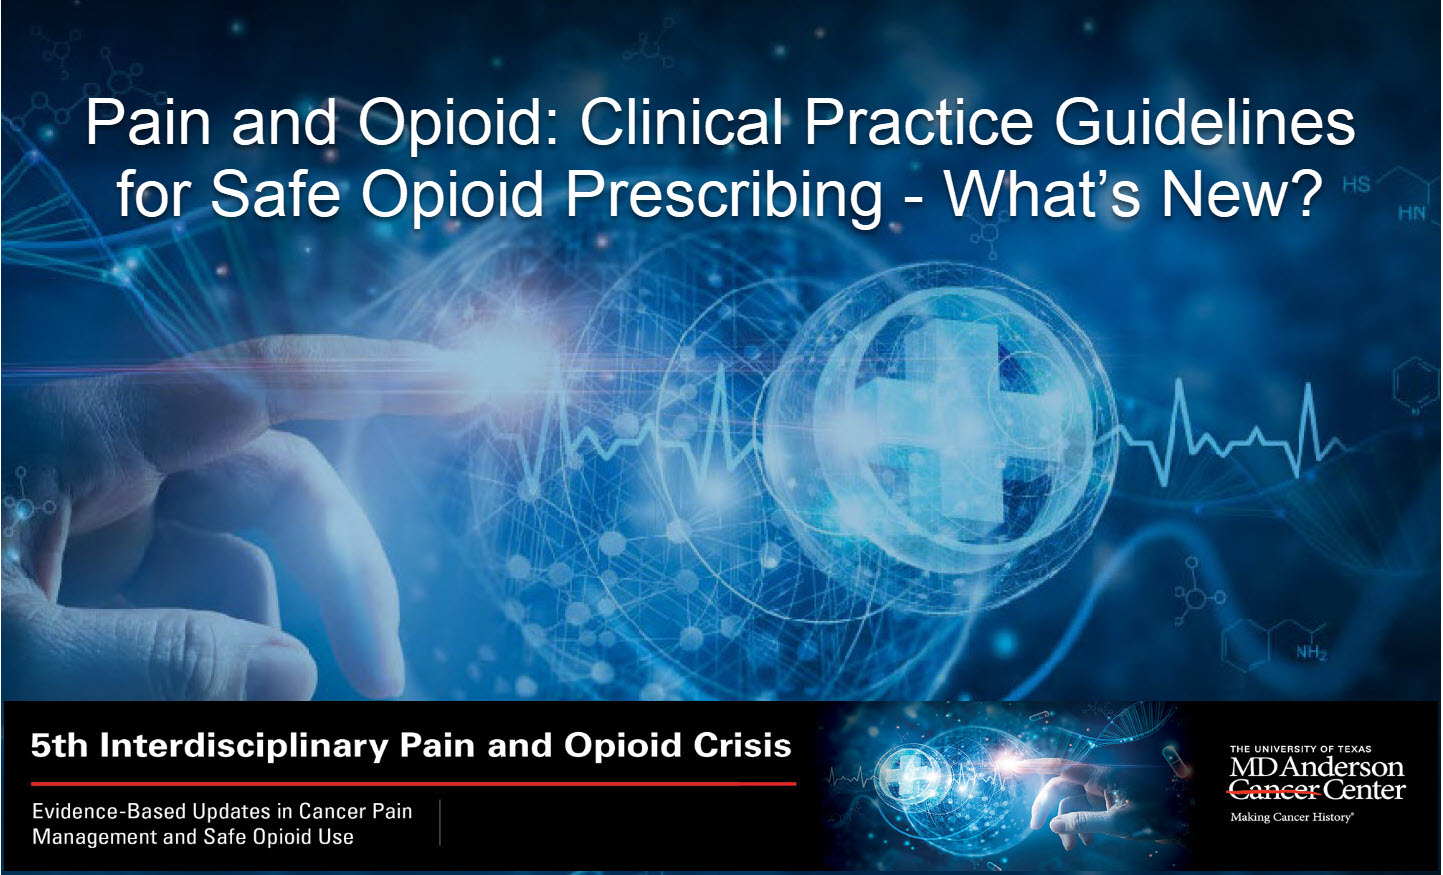 Clinical Practice Guidelines for Safe Opioid Prescribing: What